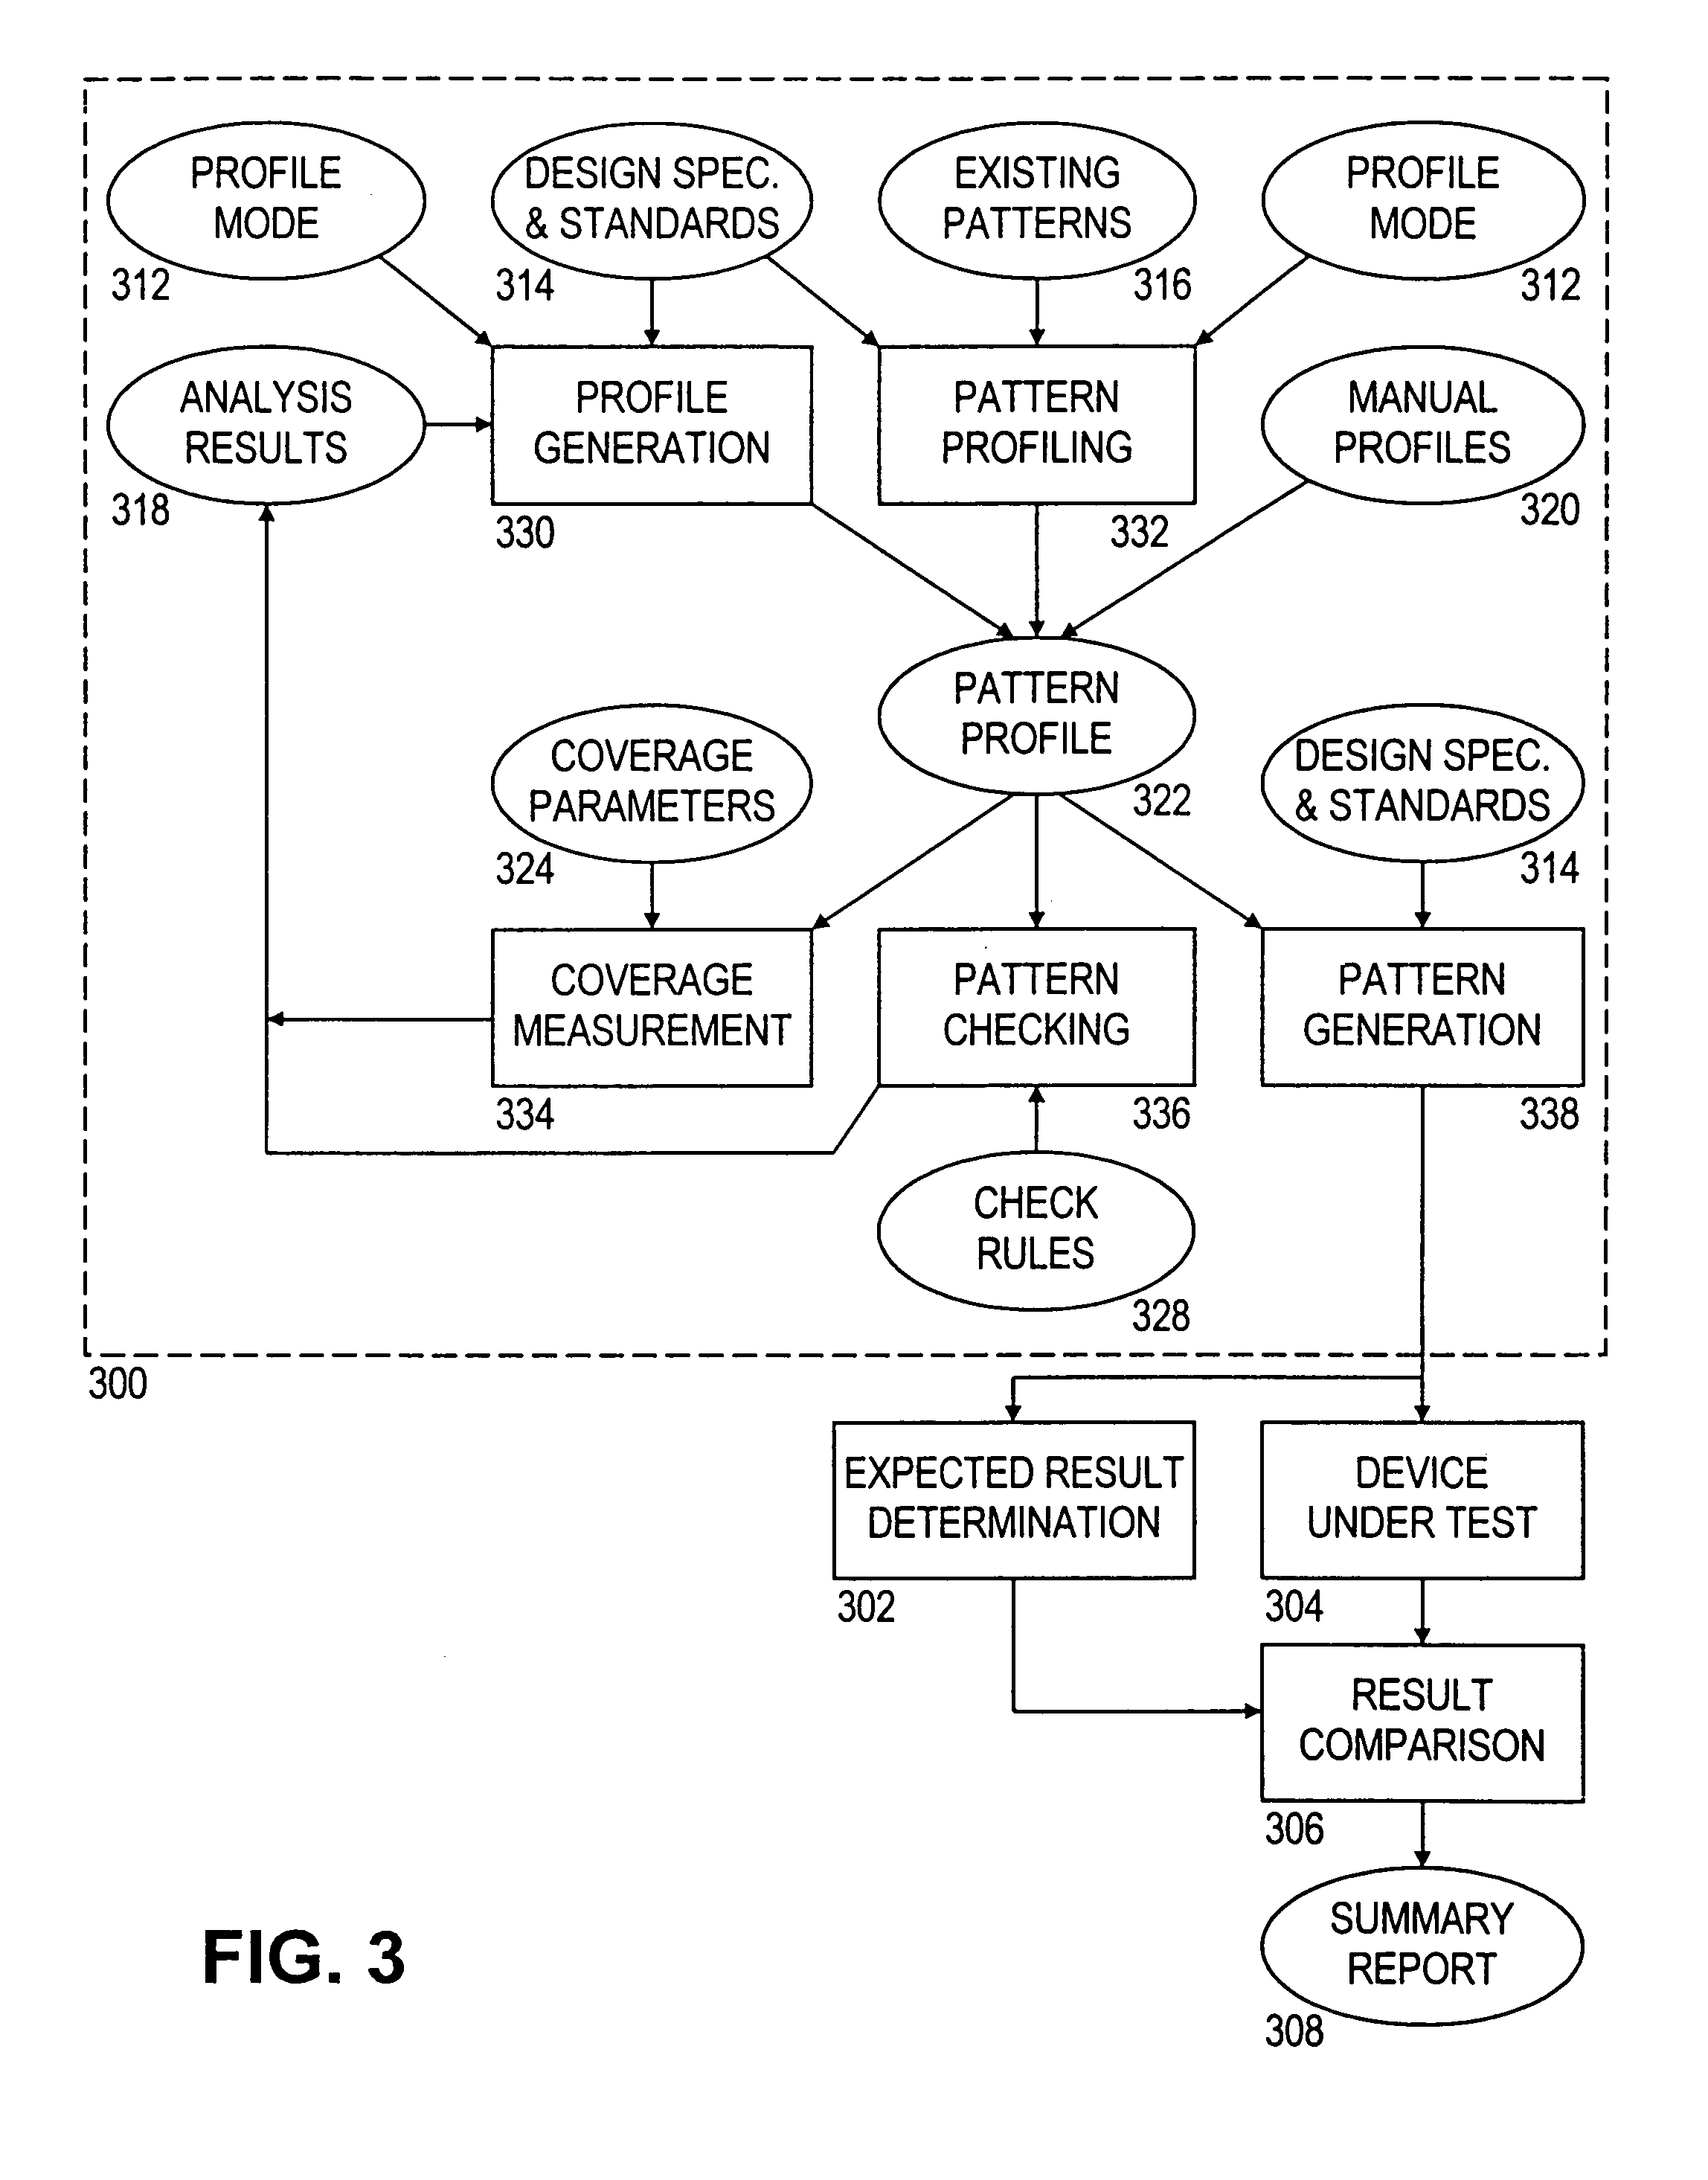 Functional-pattern management system for device verification